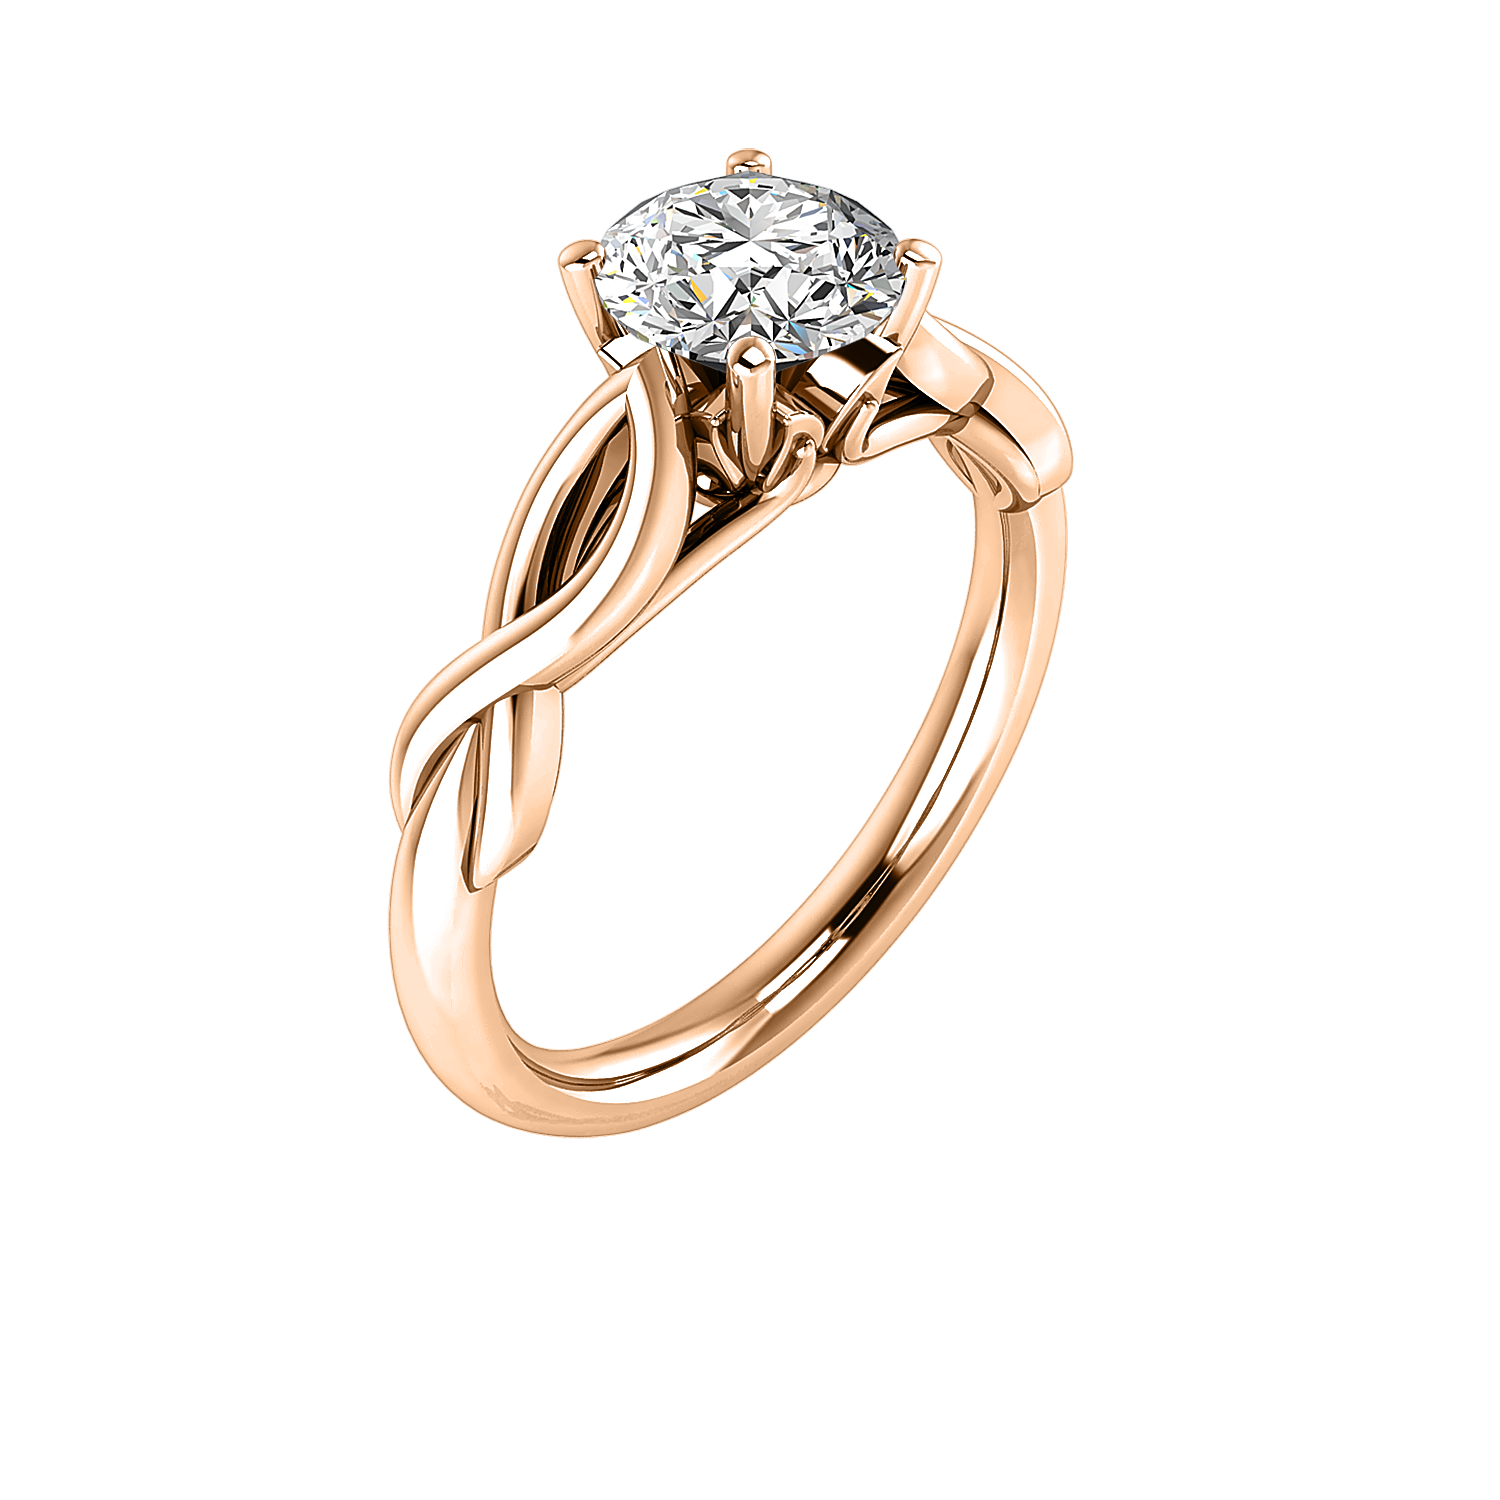 Mia Twisted Plain band 4 prong Solitaire - The Diamond Club